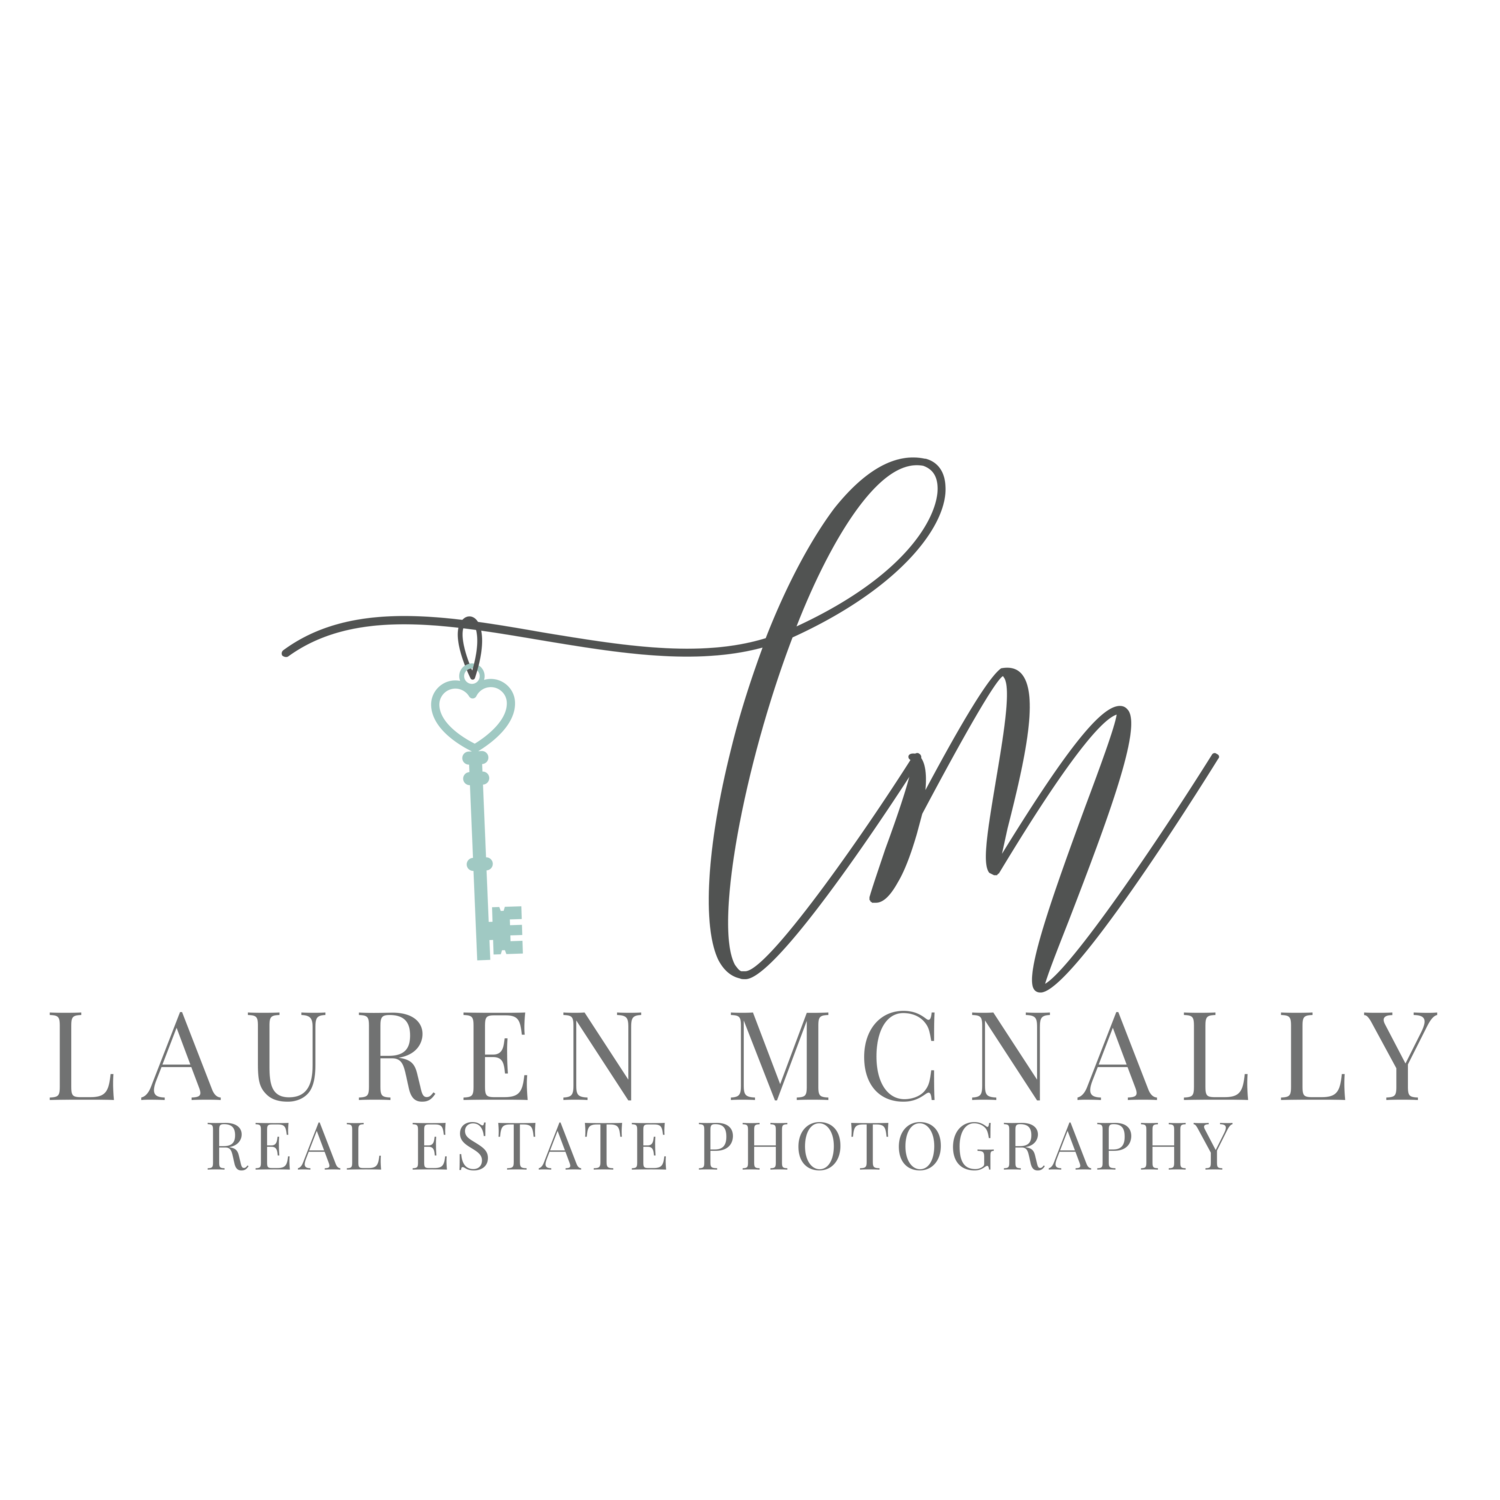 Lauren McNally Real Estate Photography